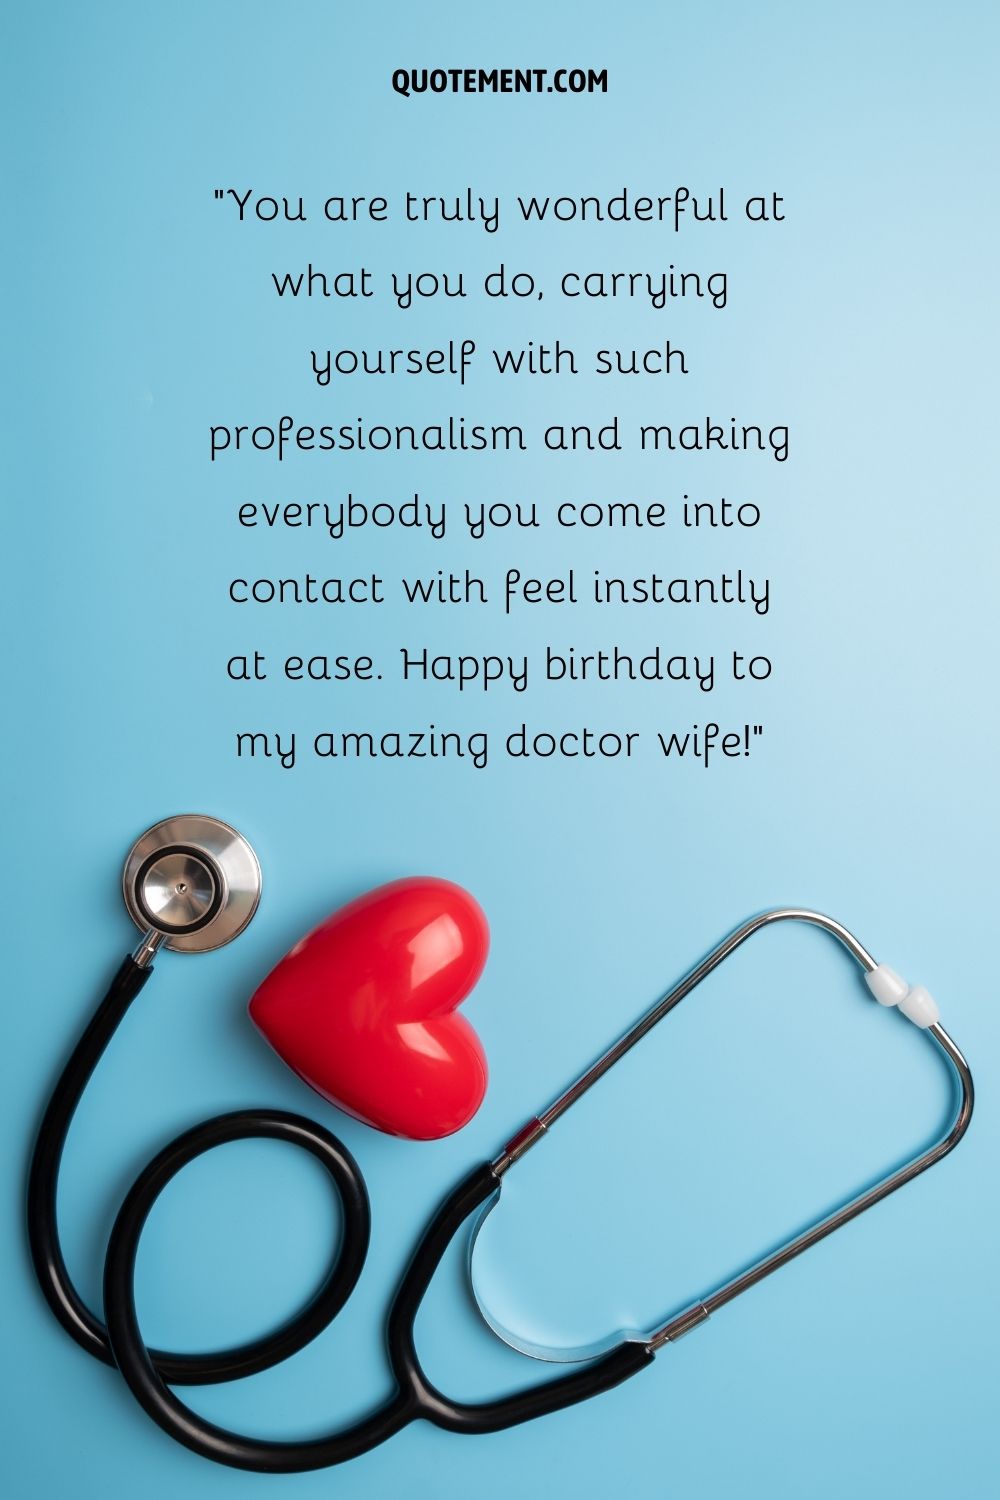 kind words in a short quote representing doctors birthday